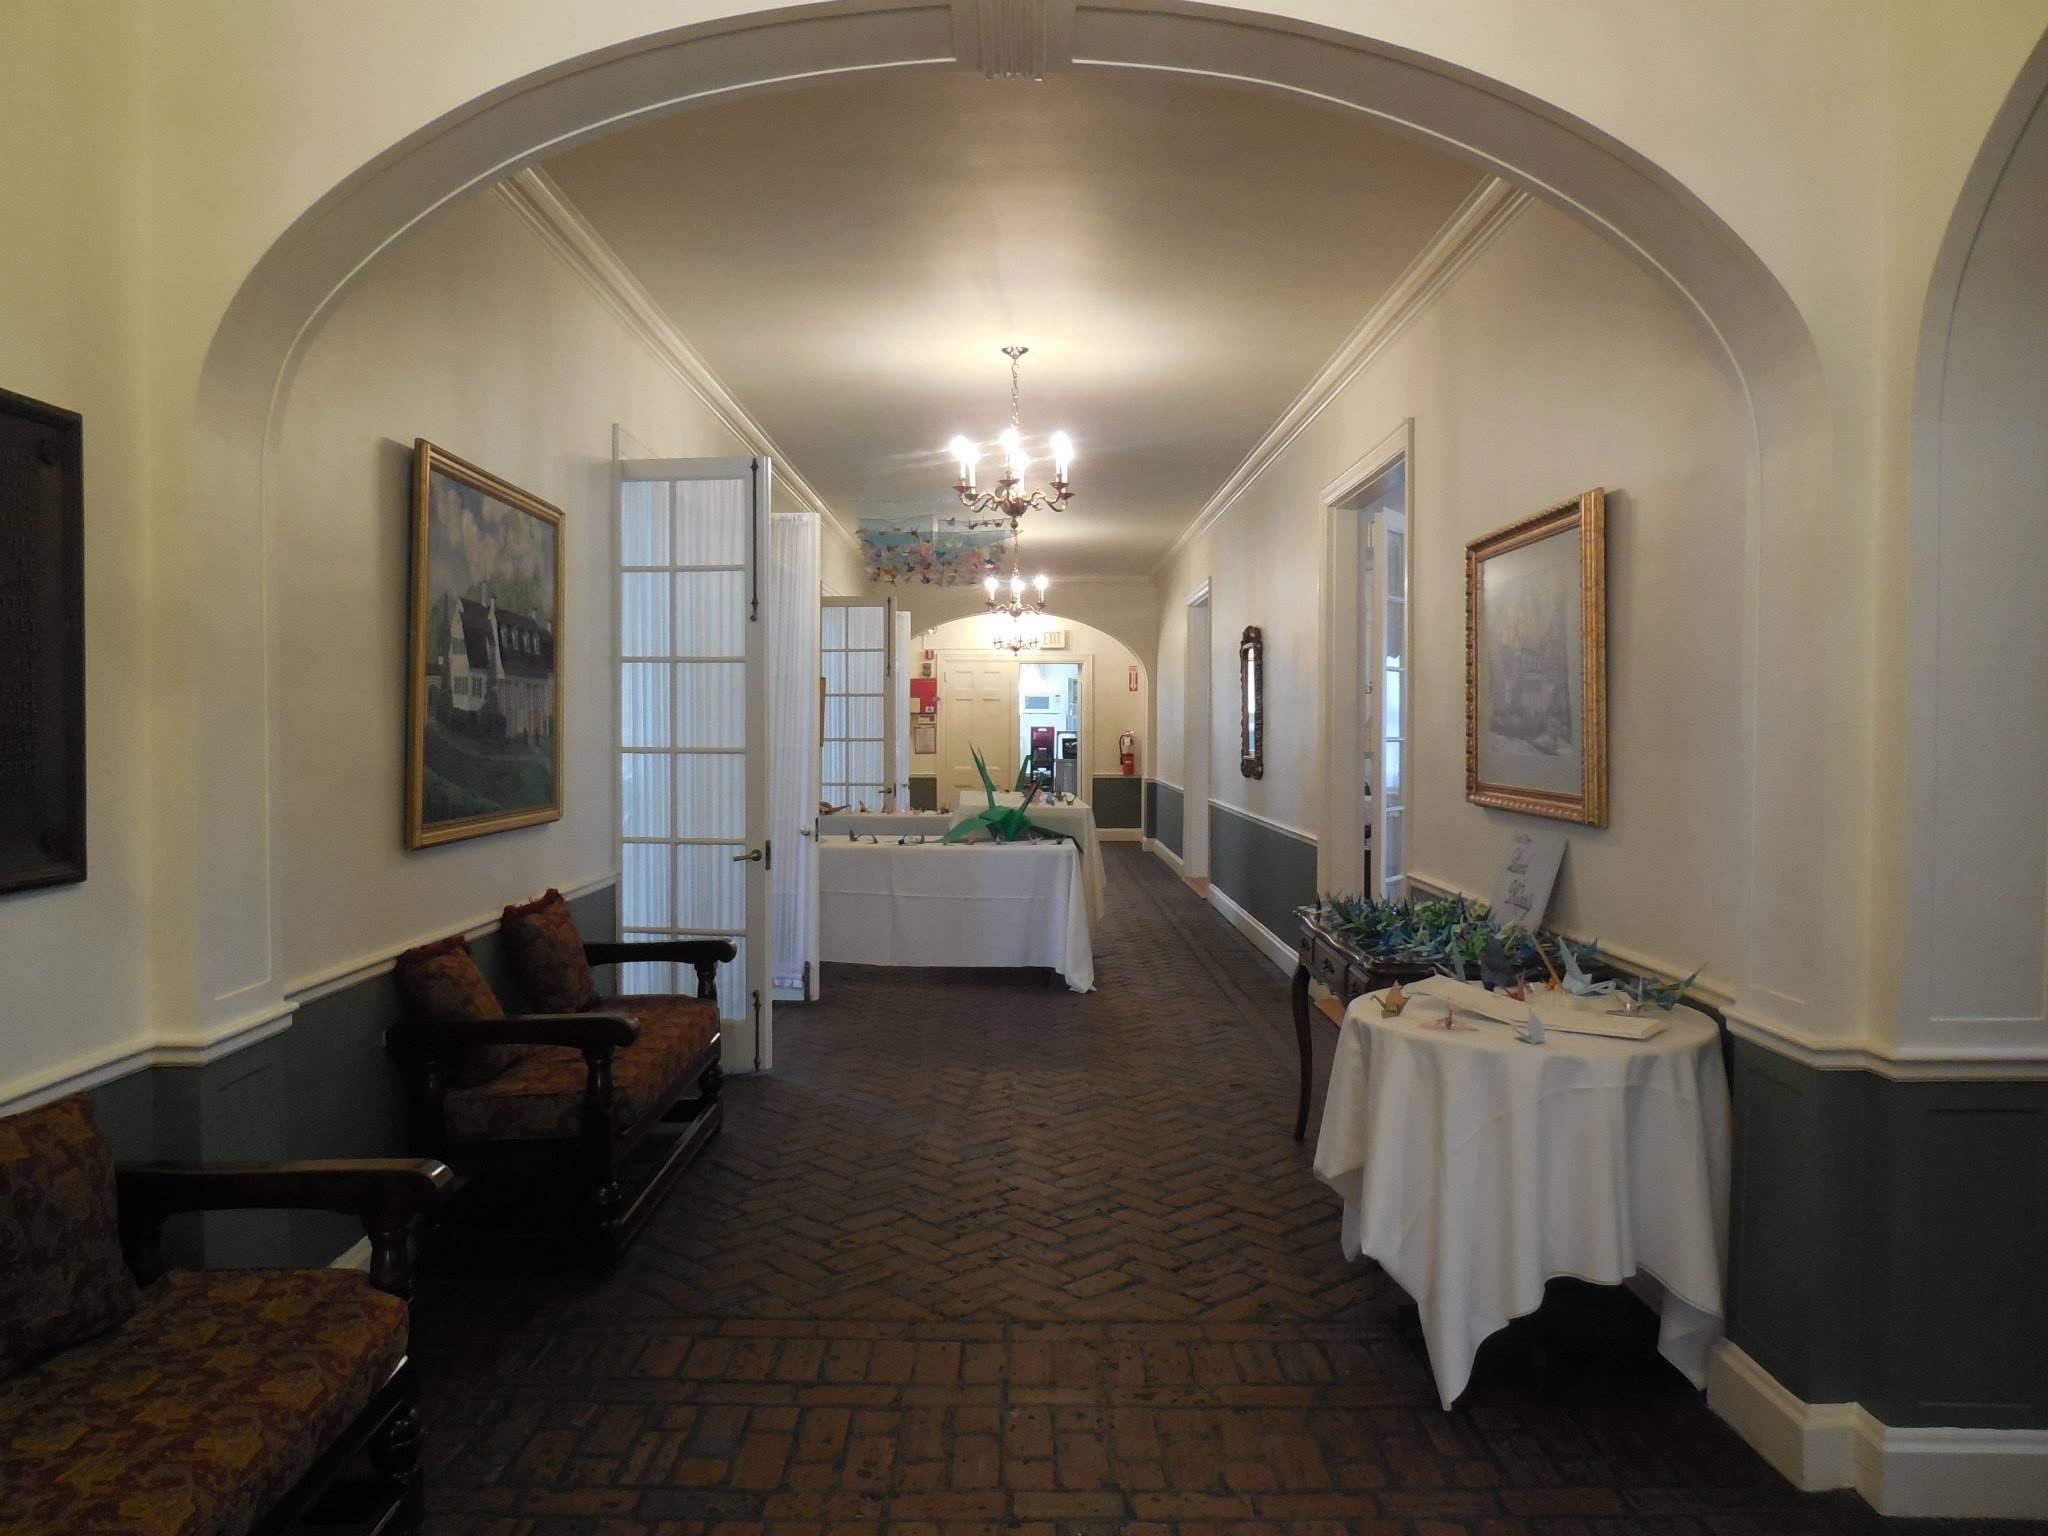 Built in 1928, with a weathered stone exterior and gabled roof, the Woman’s Club of Ridgewood’s interior is reminiscent of the style of a fine Dutch colonial home.